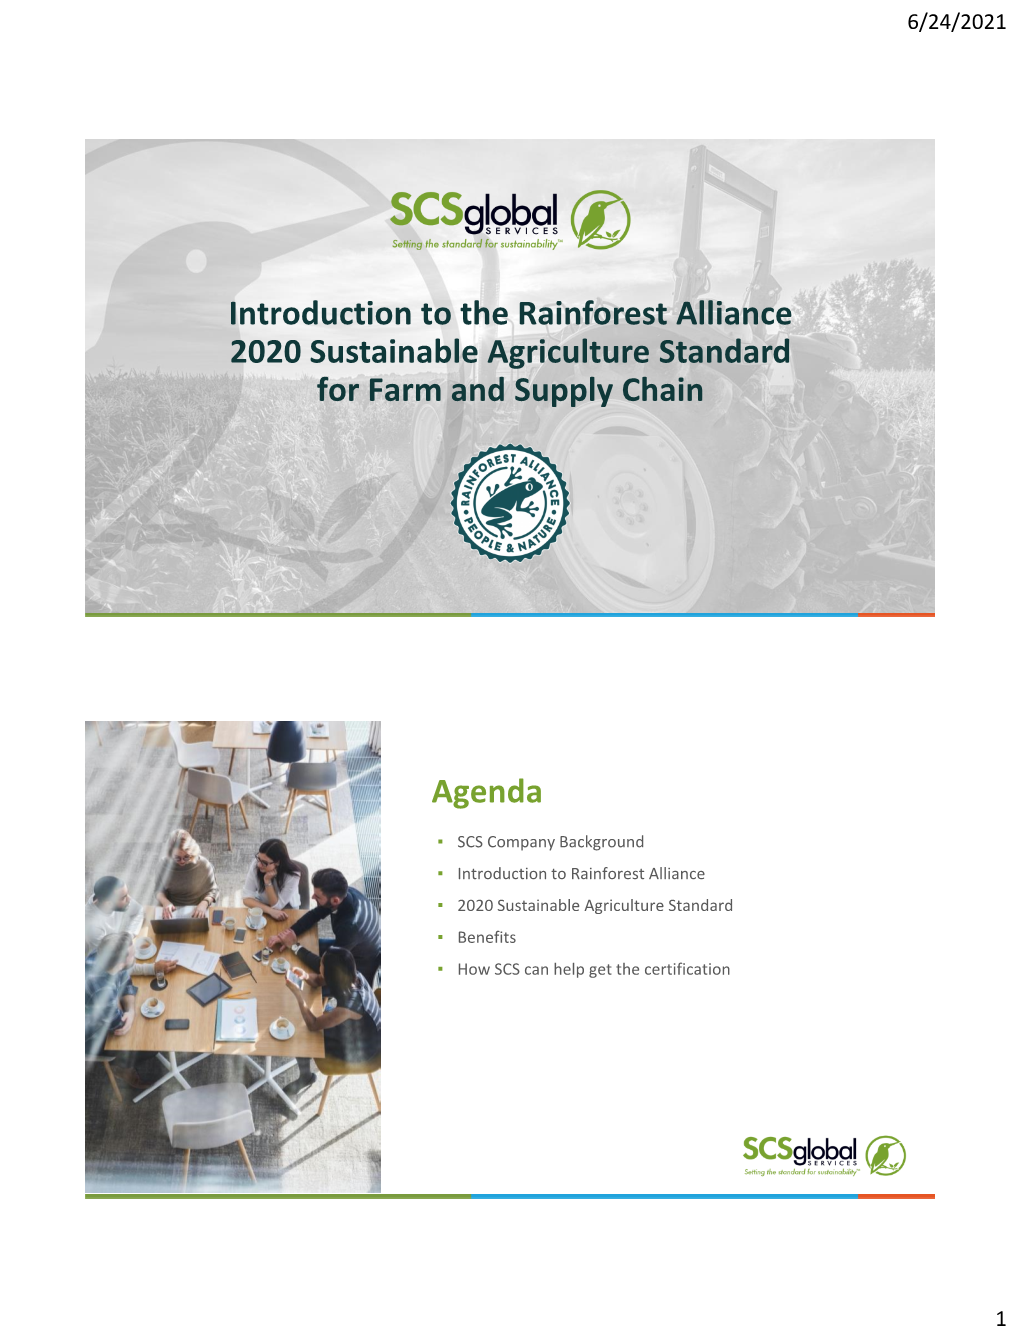 The Rainforest Alliance 2020 Sustainable Agriculture Standard for Farm and Supply Chain